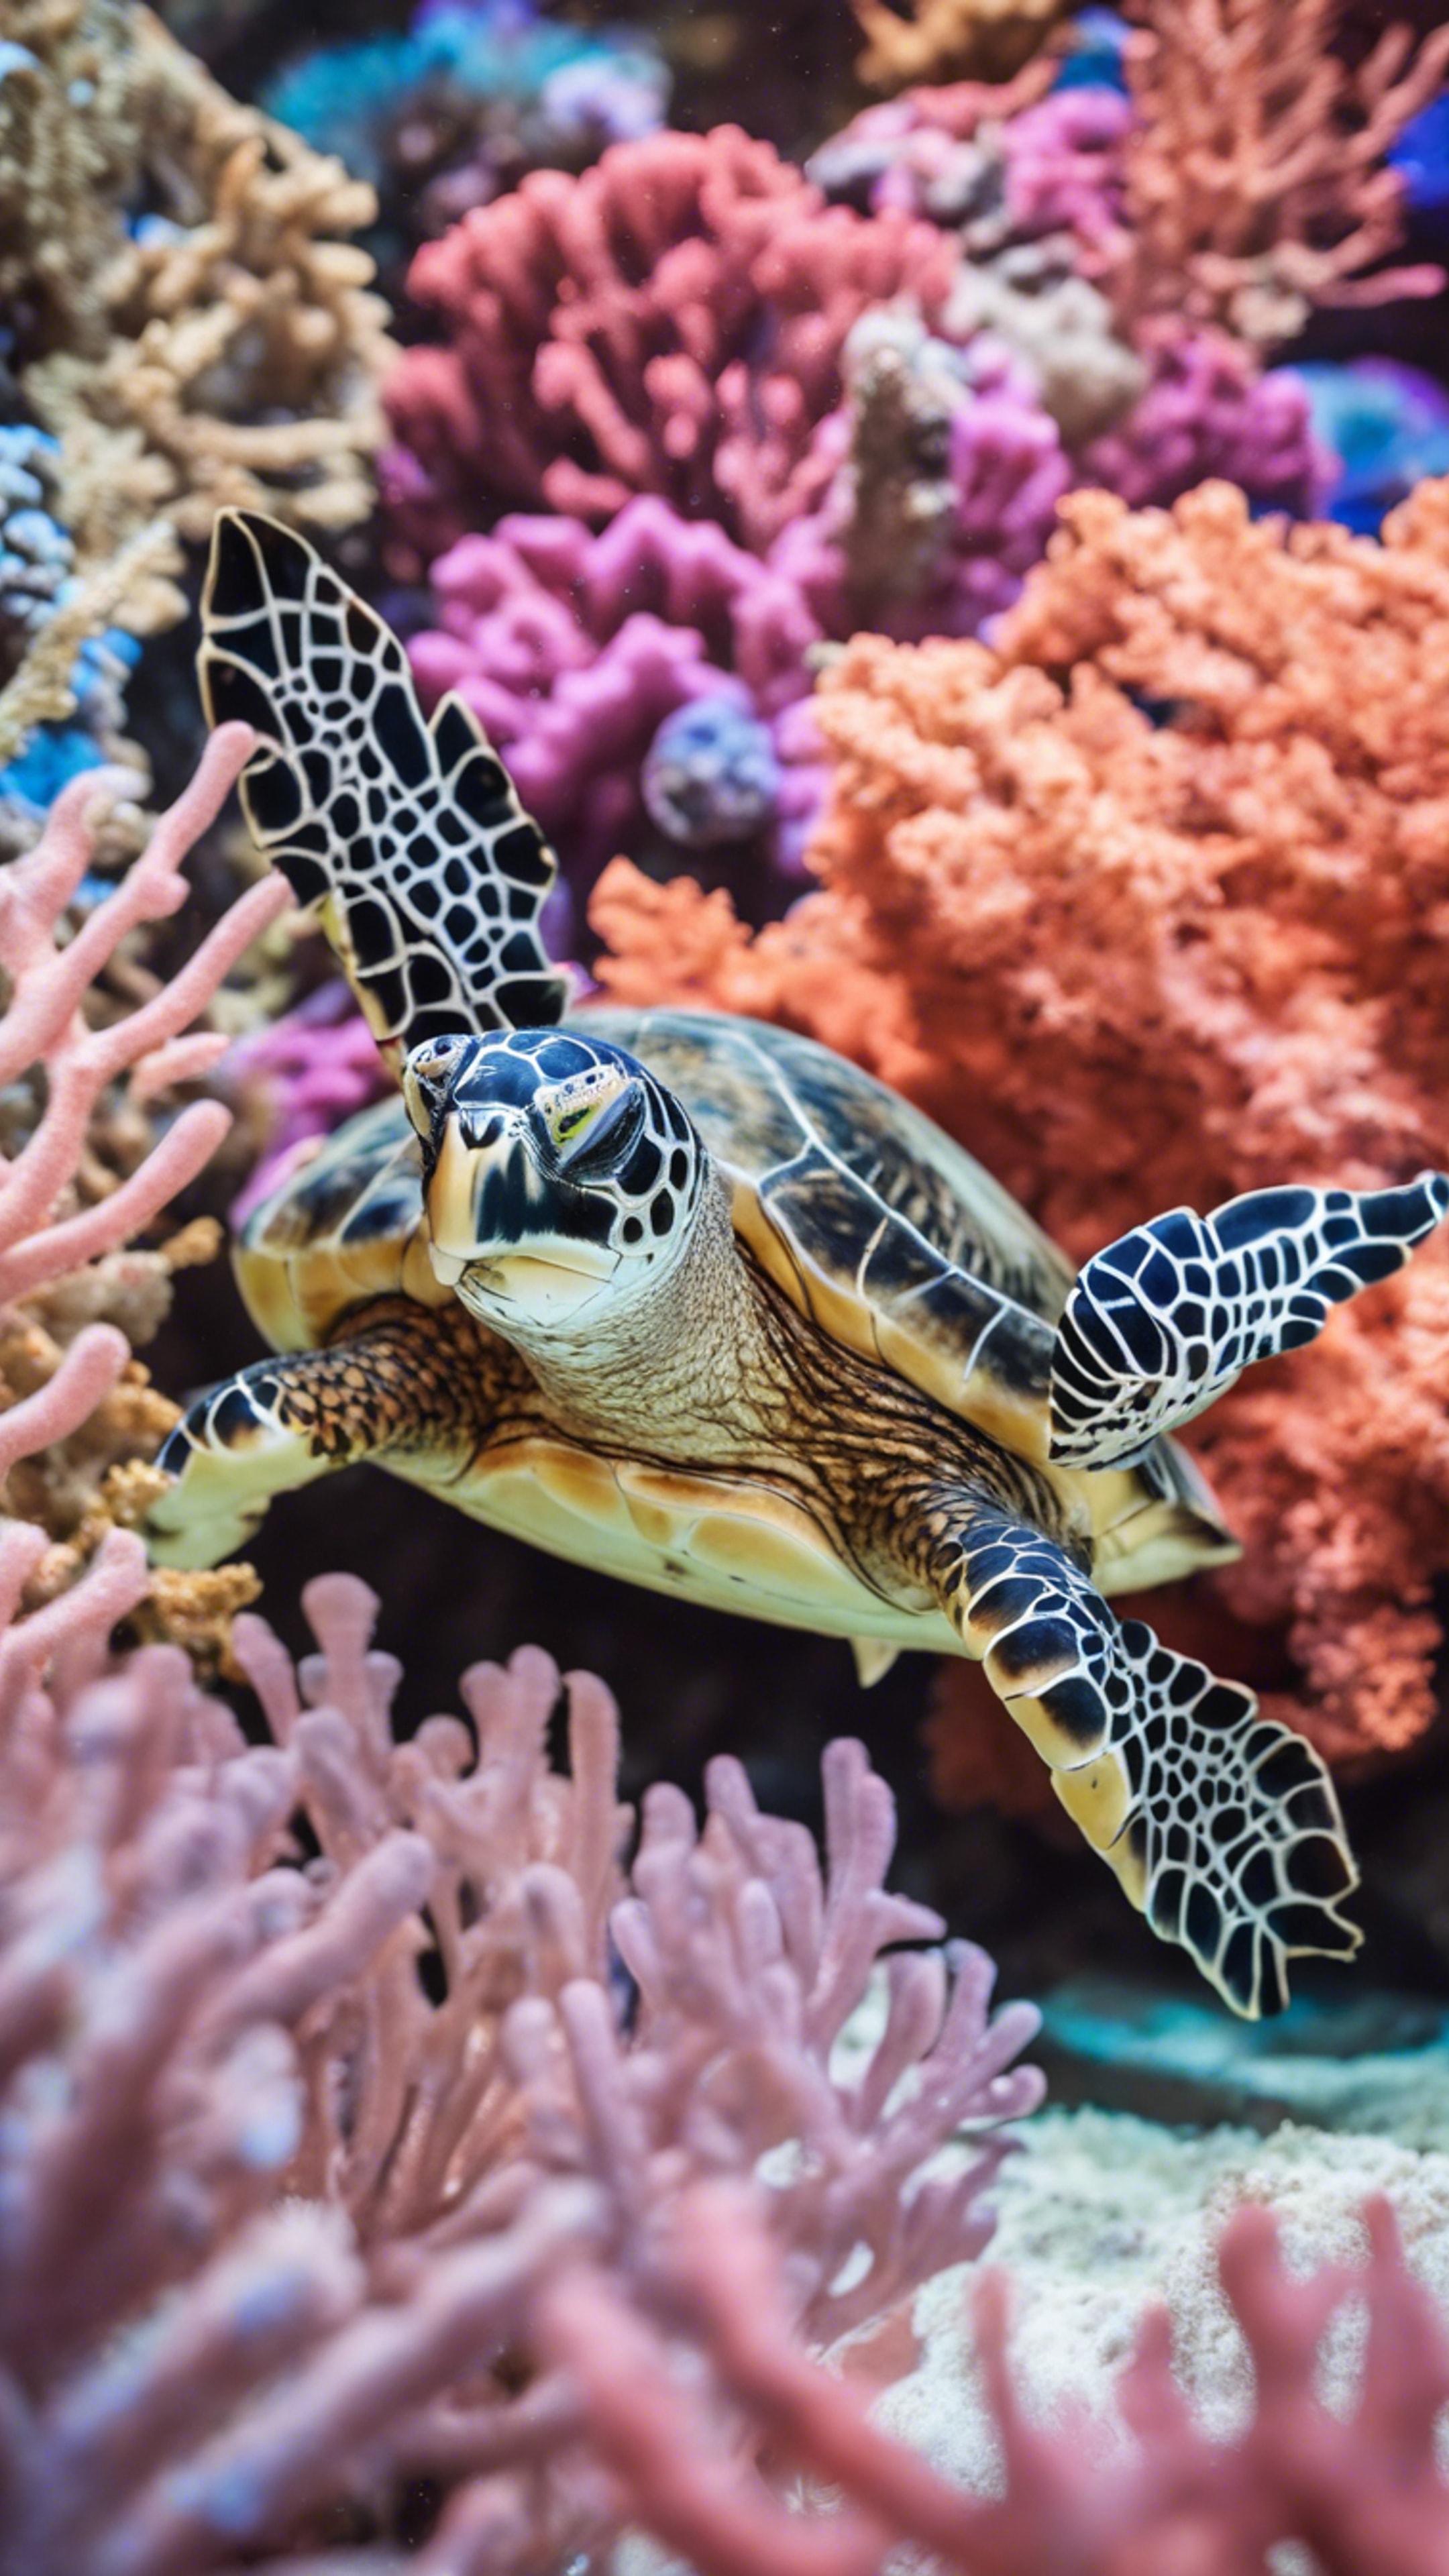 A Hawksbill sea turtle maneuvering through the maze of colorful coral reefs.壁紙[66823da67ed644d68f87]